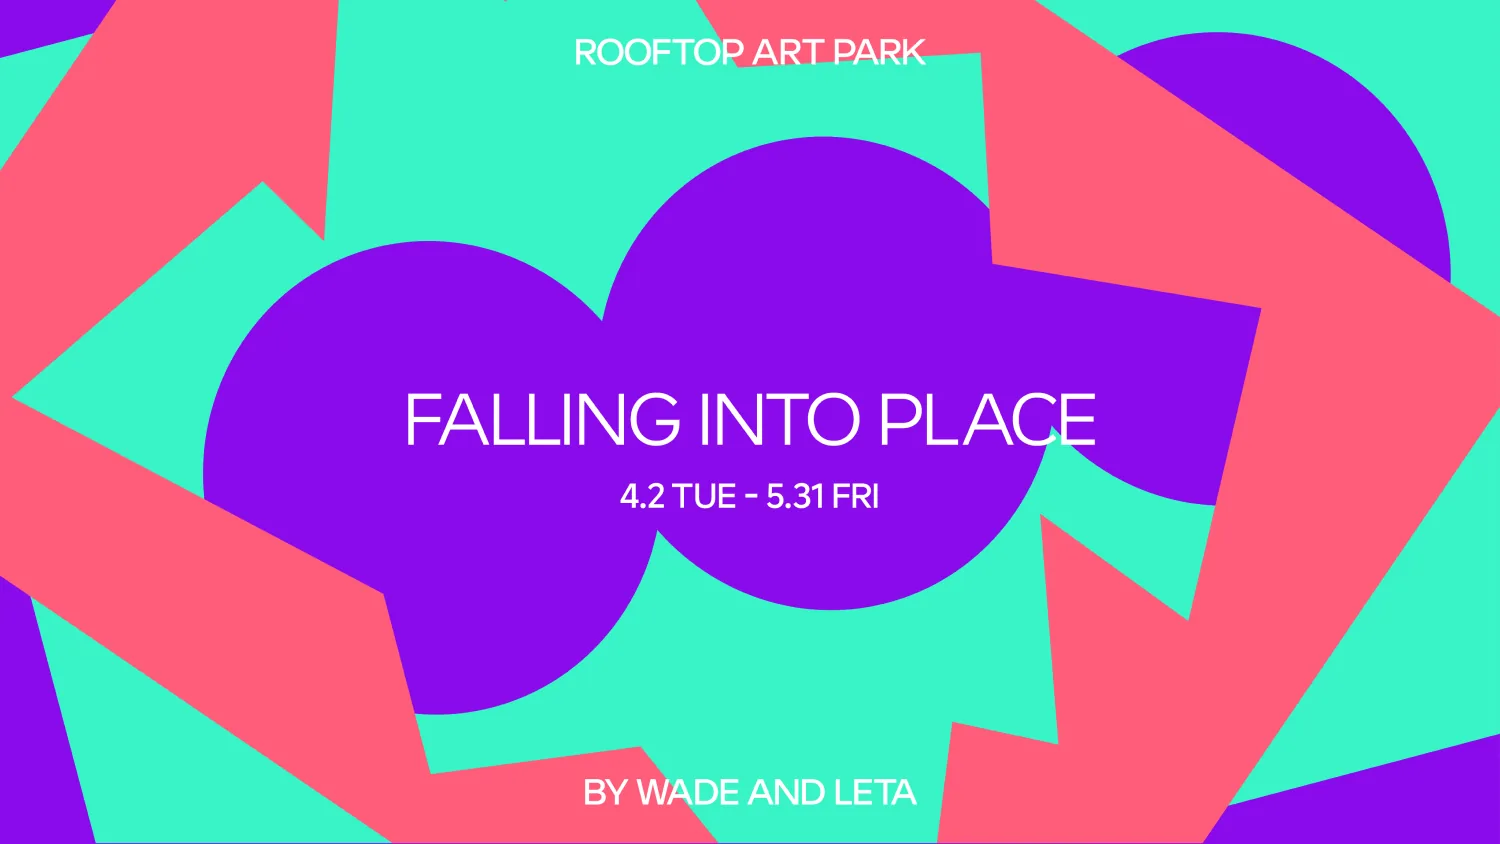 ROOFTOP ART PARK 「Falling Into Place」 image1